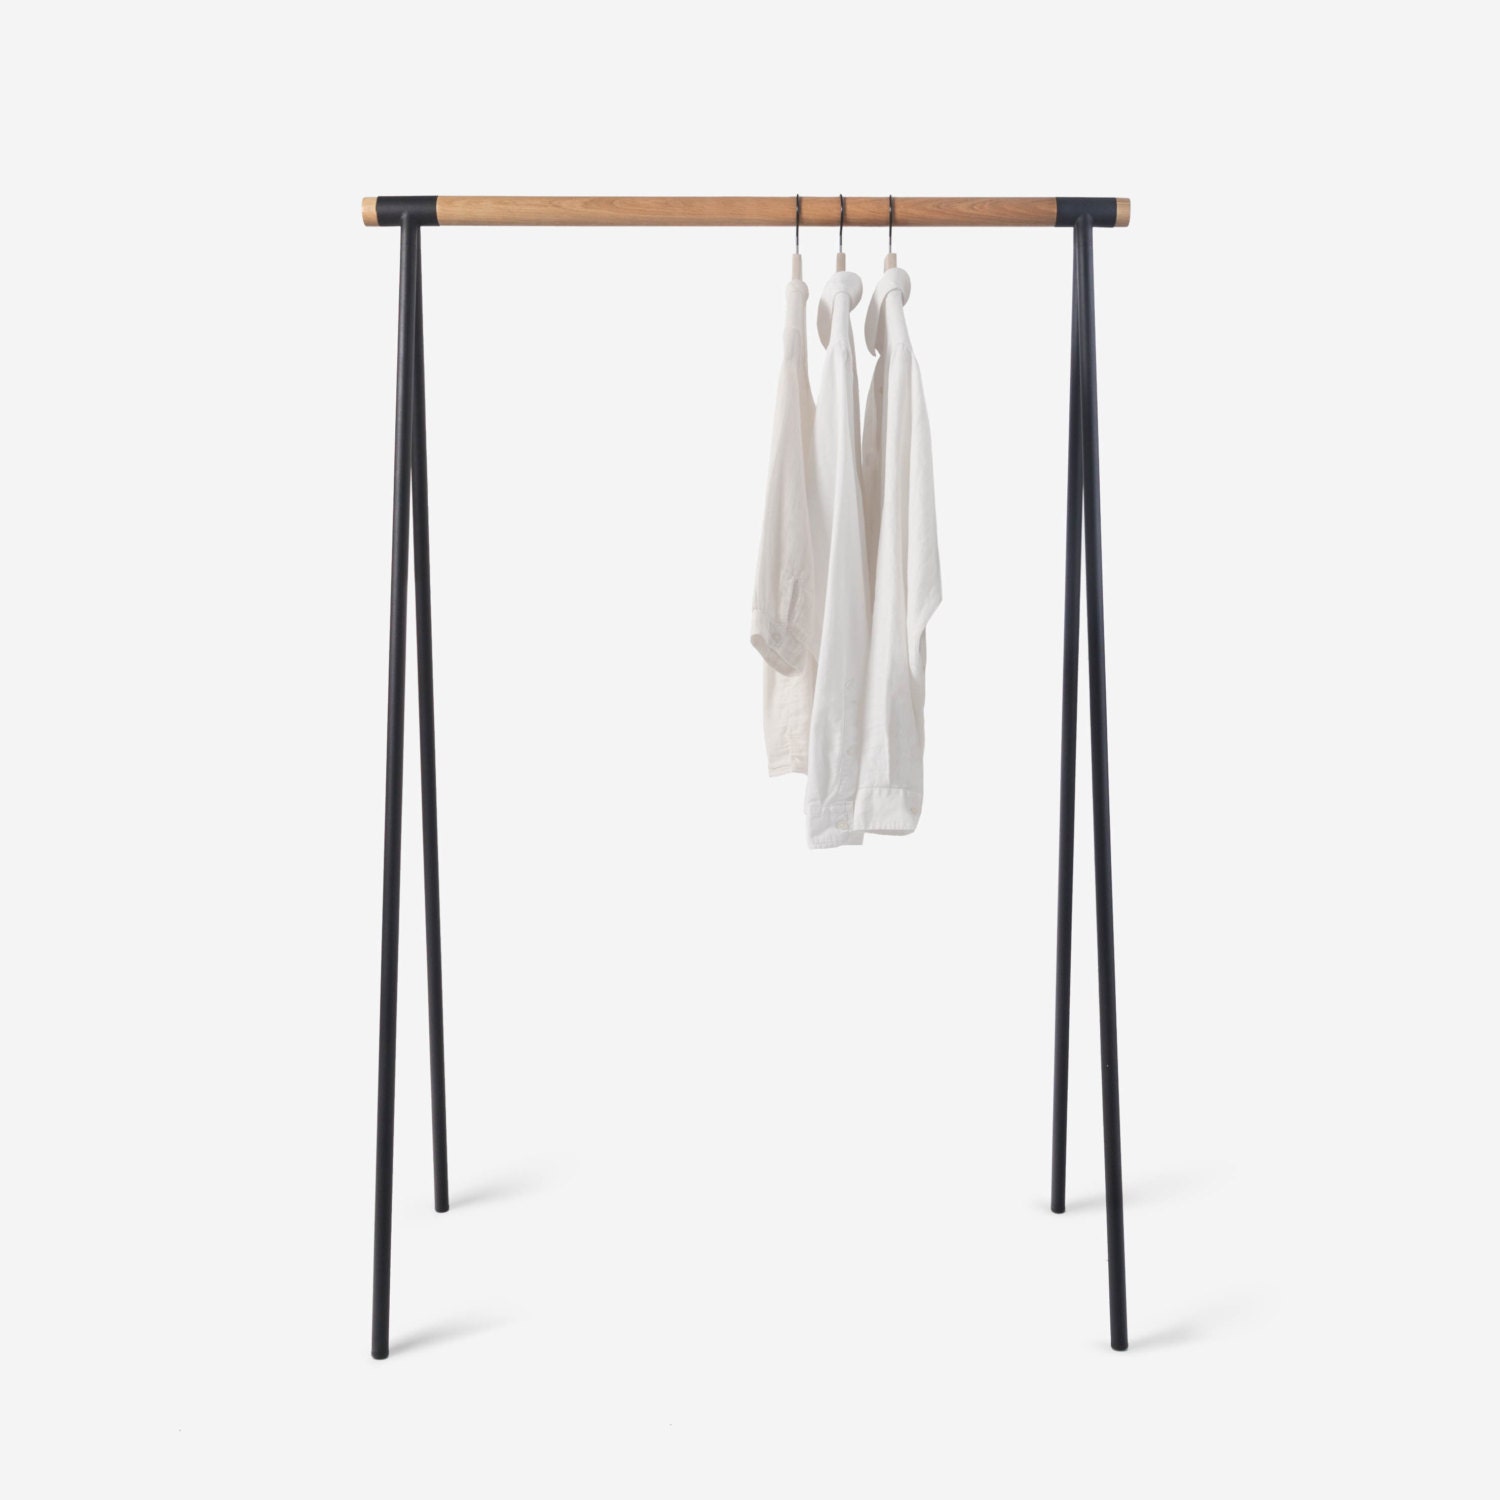 Minimalist Clothes Rack by akronstreet on Etsy